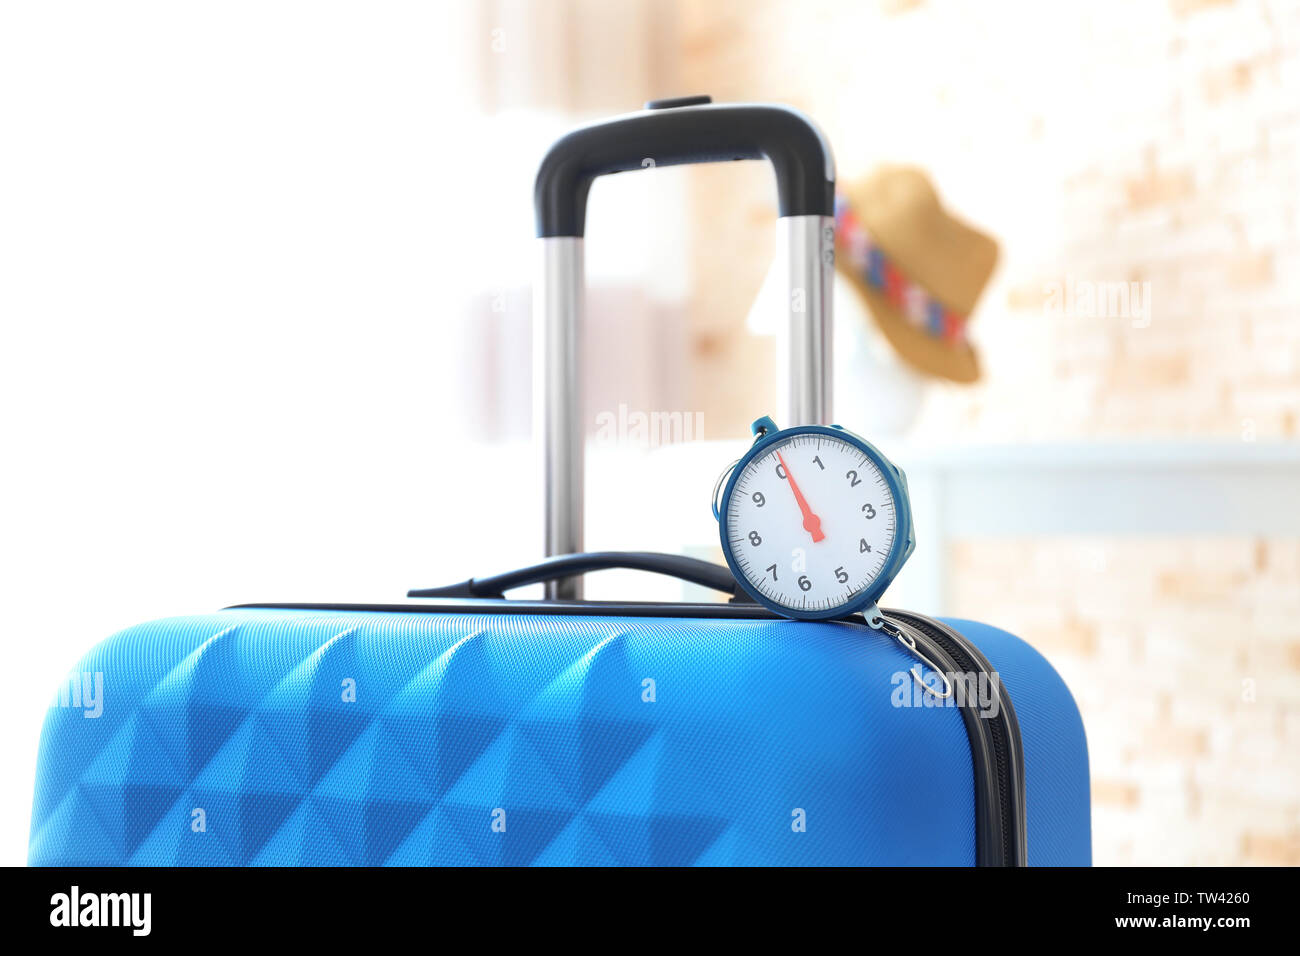 https://c8.alamy.com/comp/TW4260/scales-on-heavy-suitcase-luggage-overweight-concept-TW4260.jpg